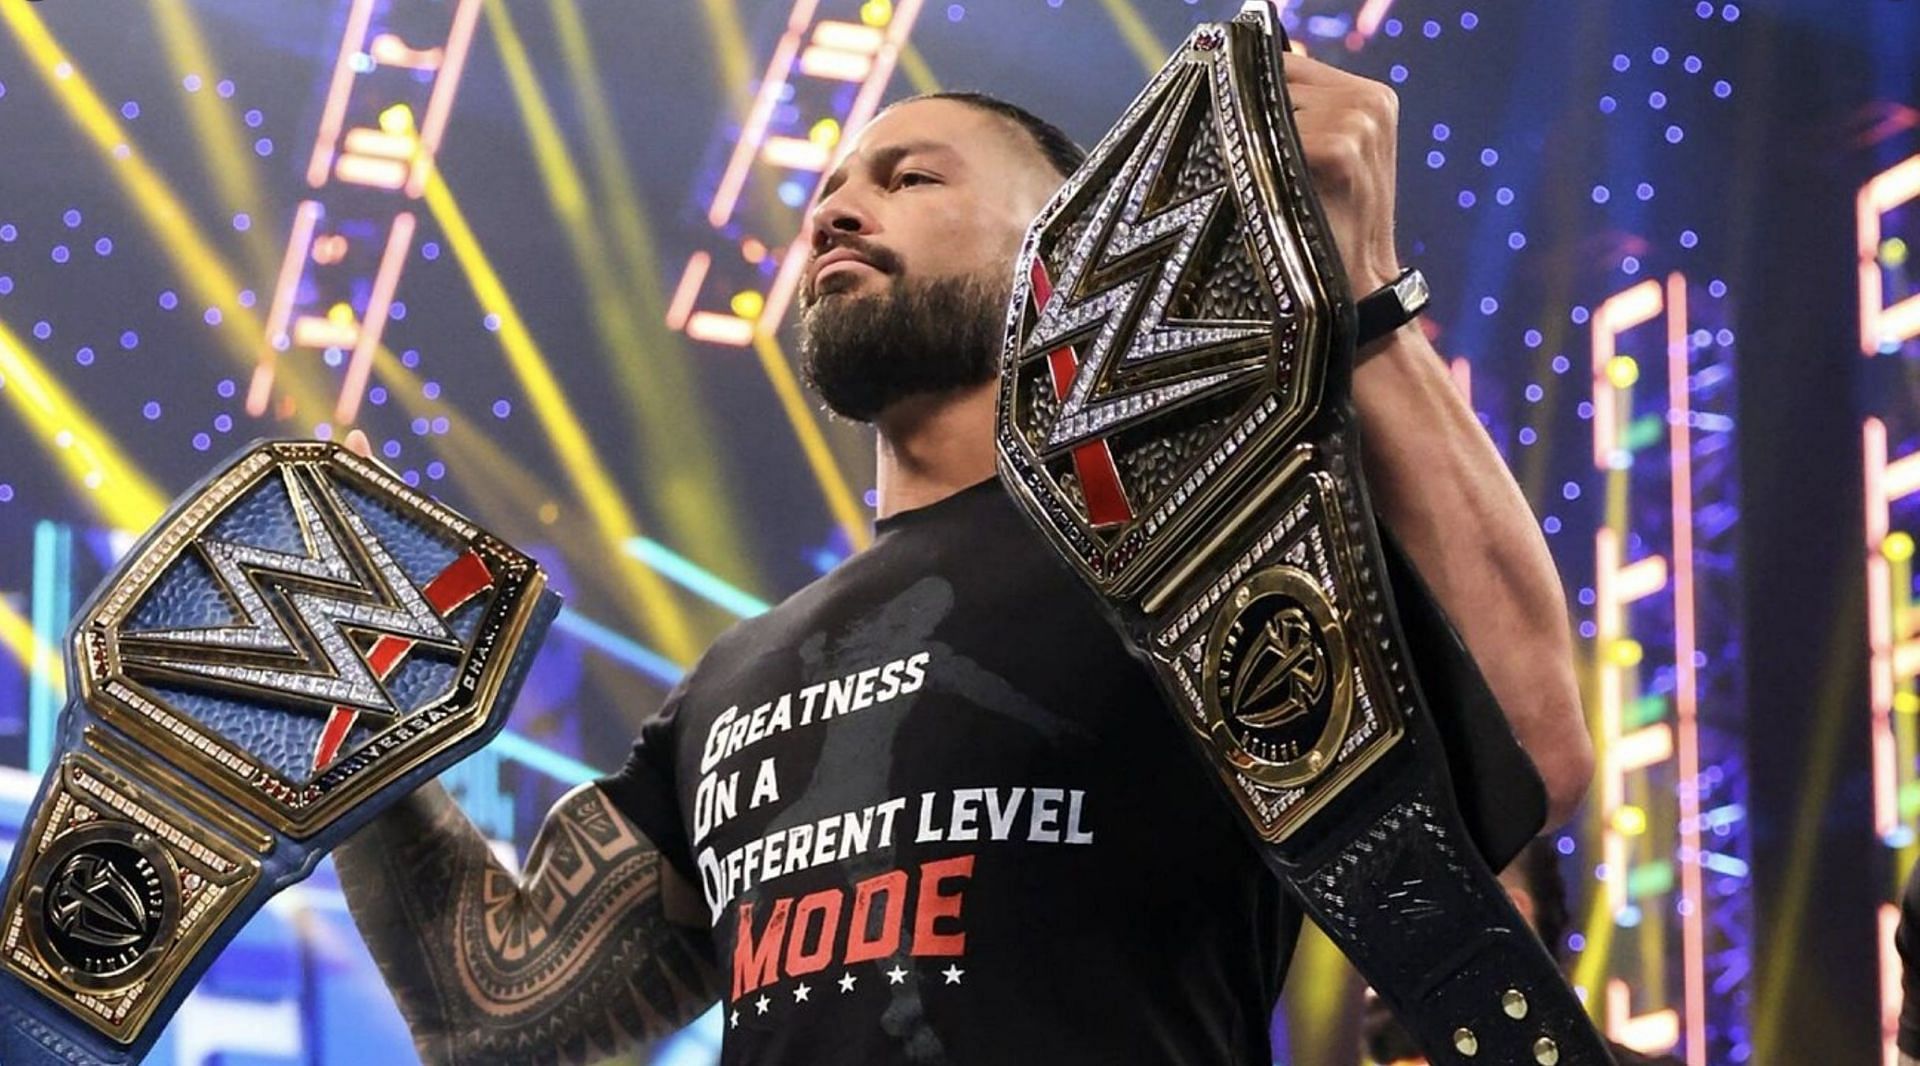 Current Undisputed WWE Universal Champion Roman Reigns.